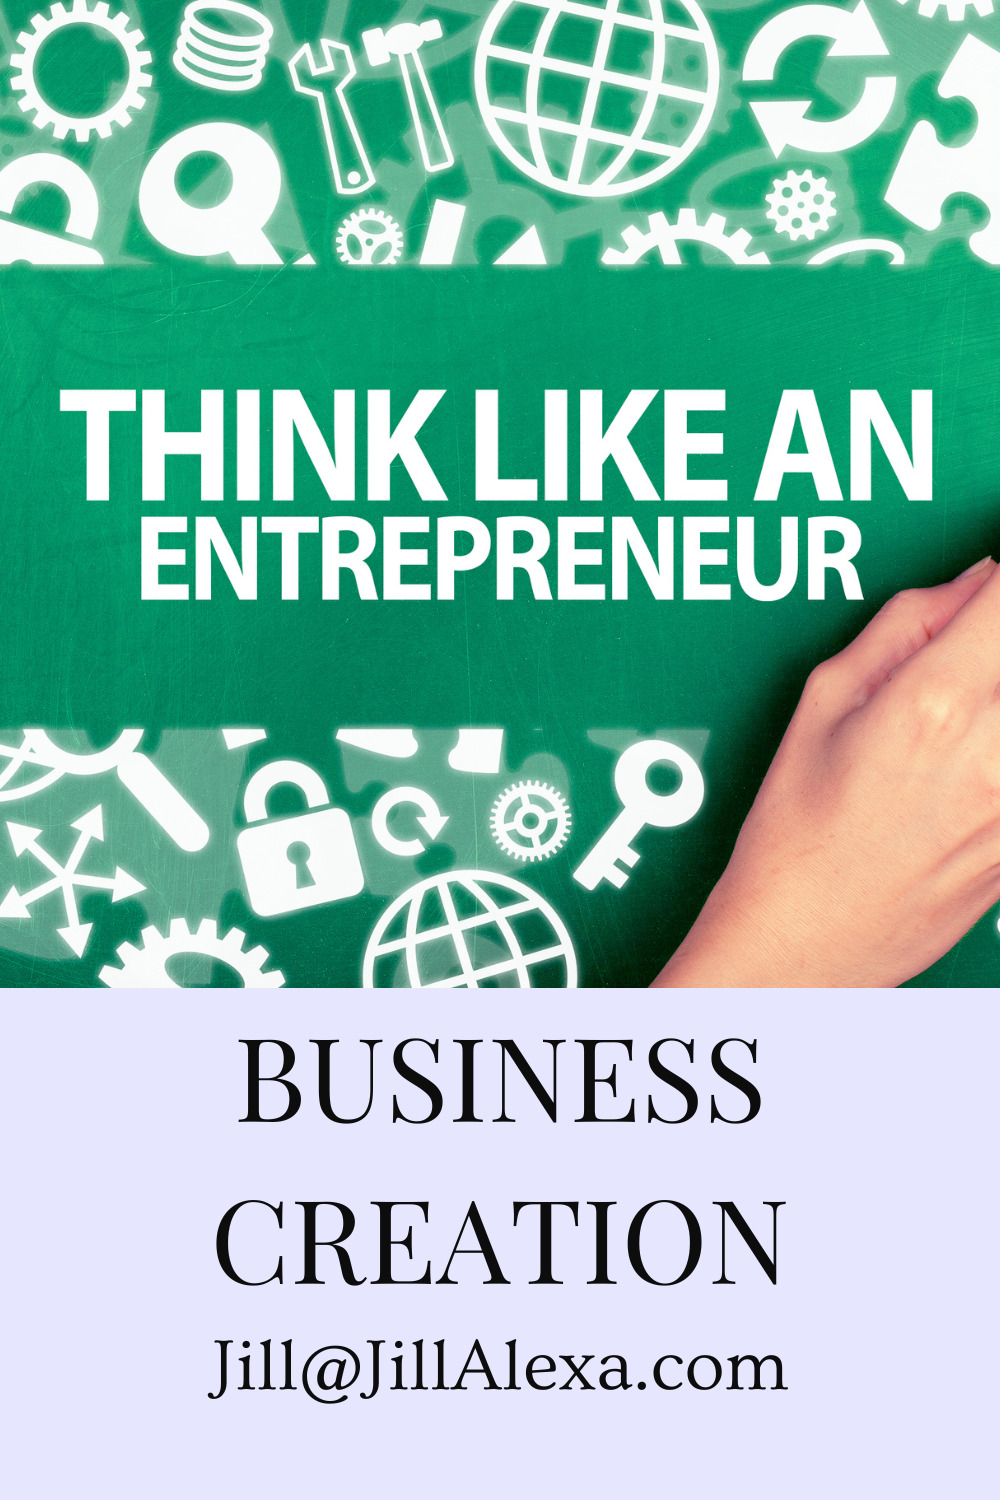 Use your creativity and entrepreneur ability to create a new business.